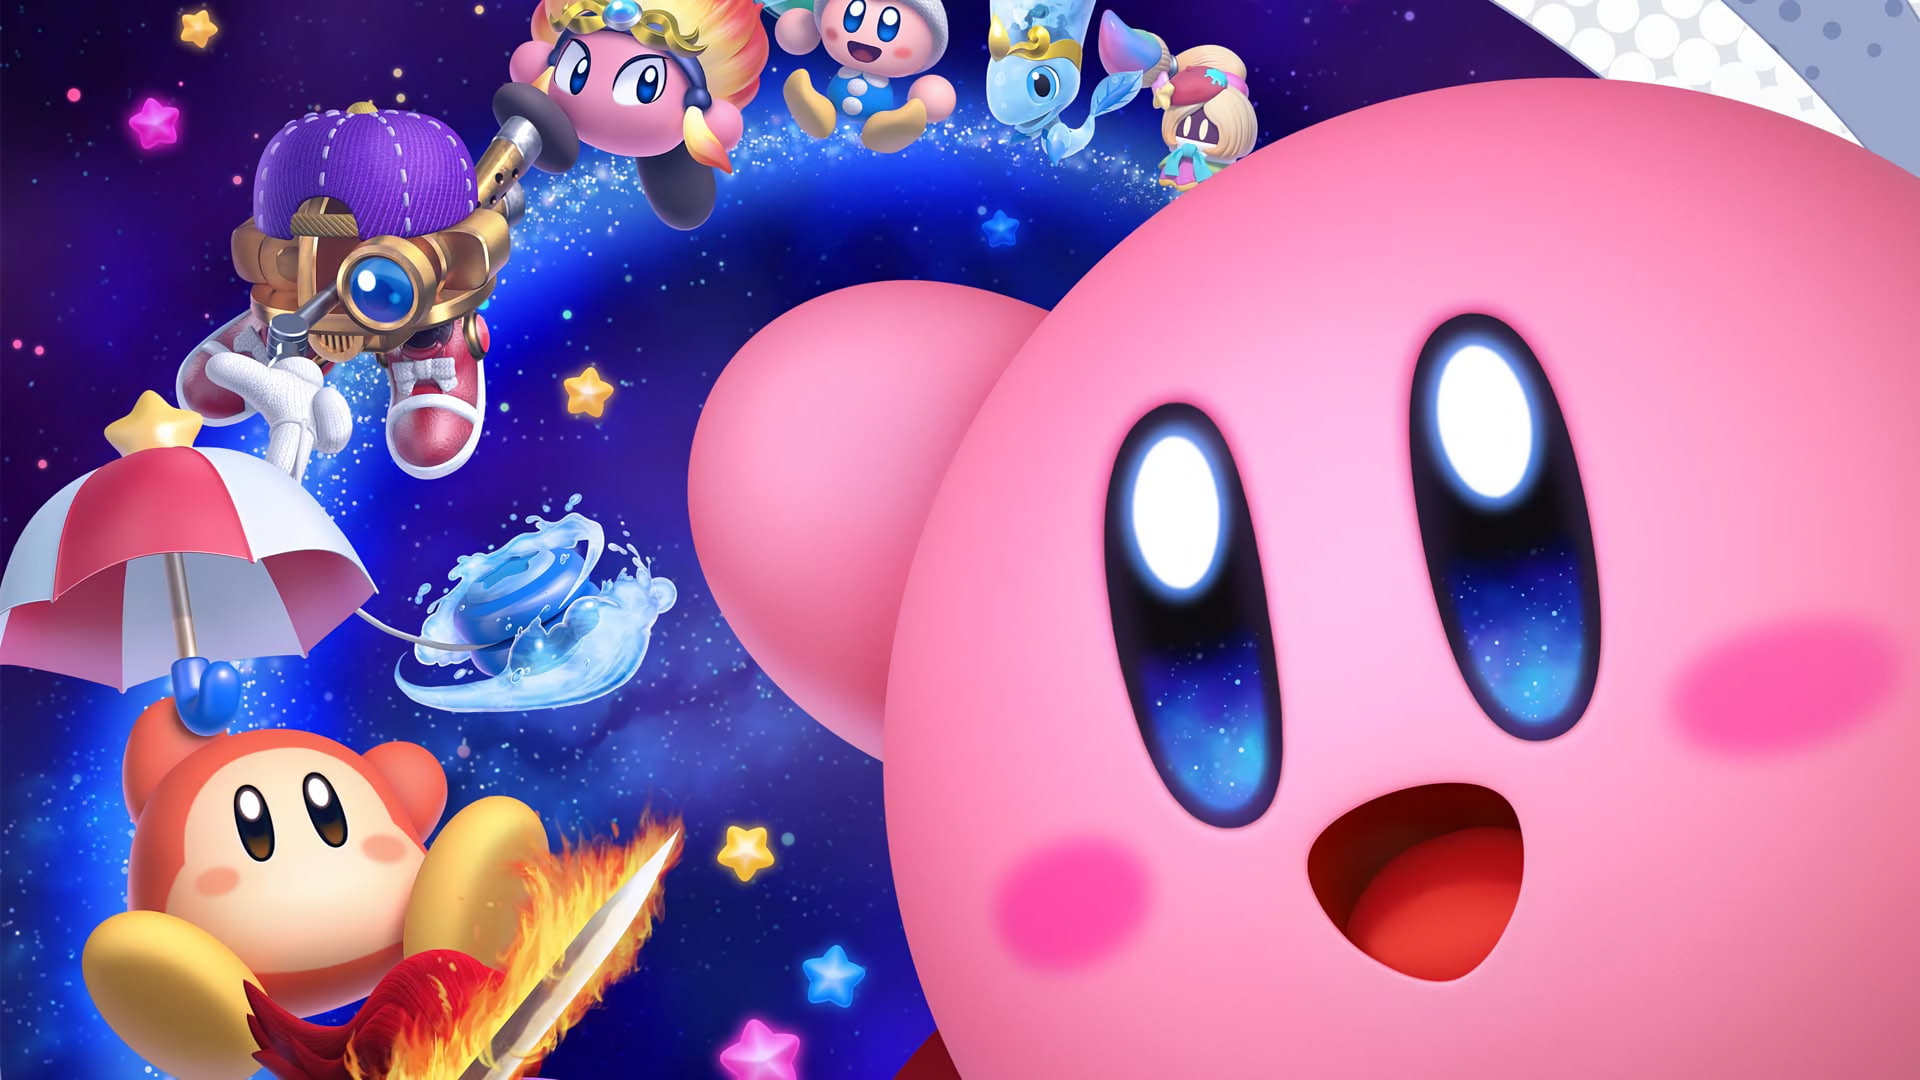 Fun facts you might not know about Kirby